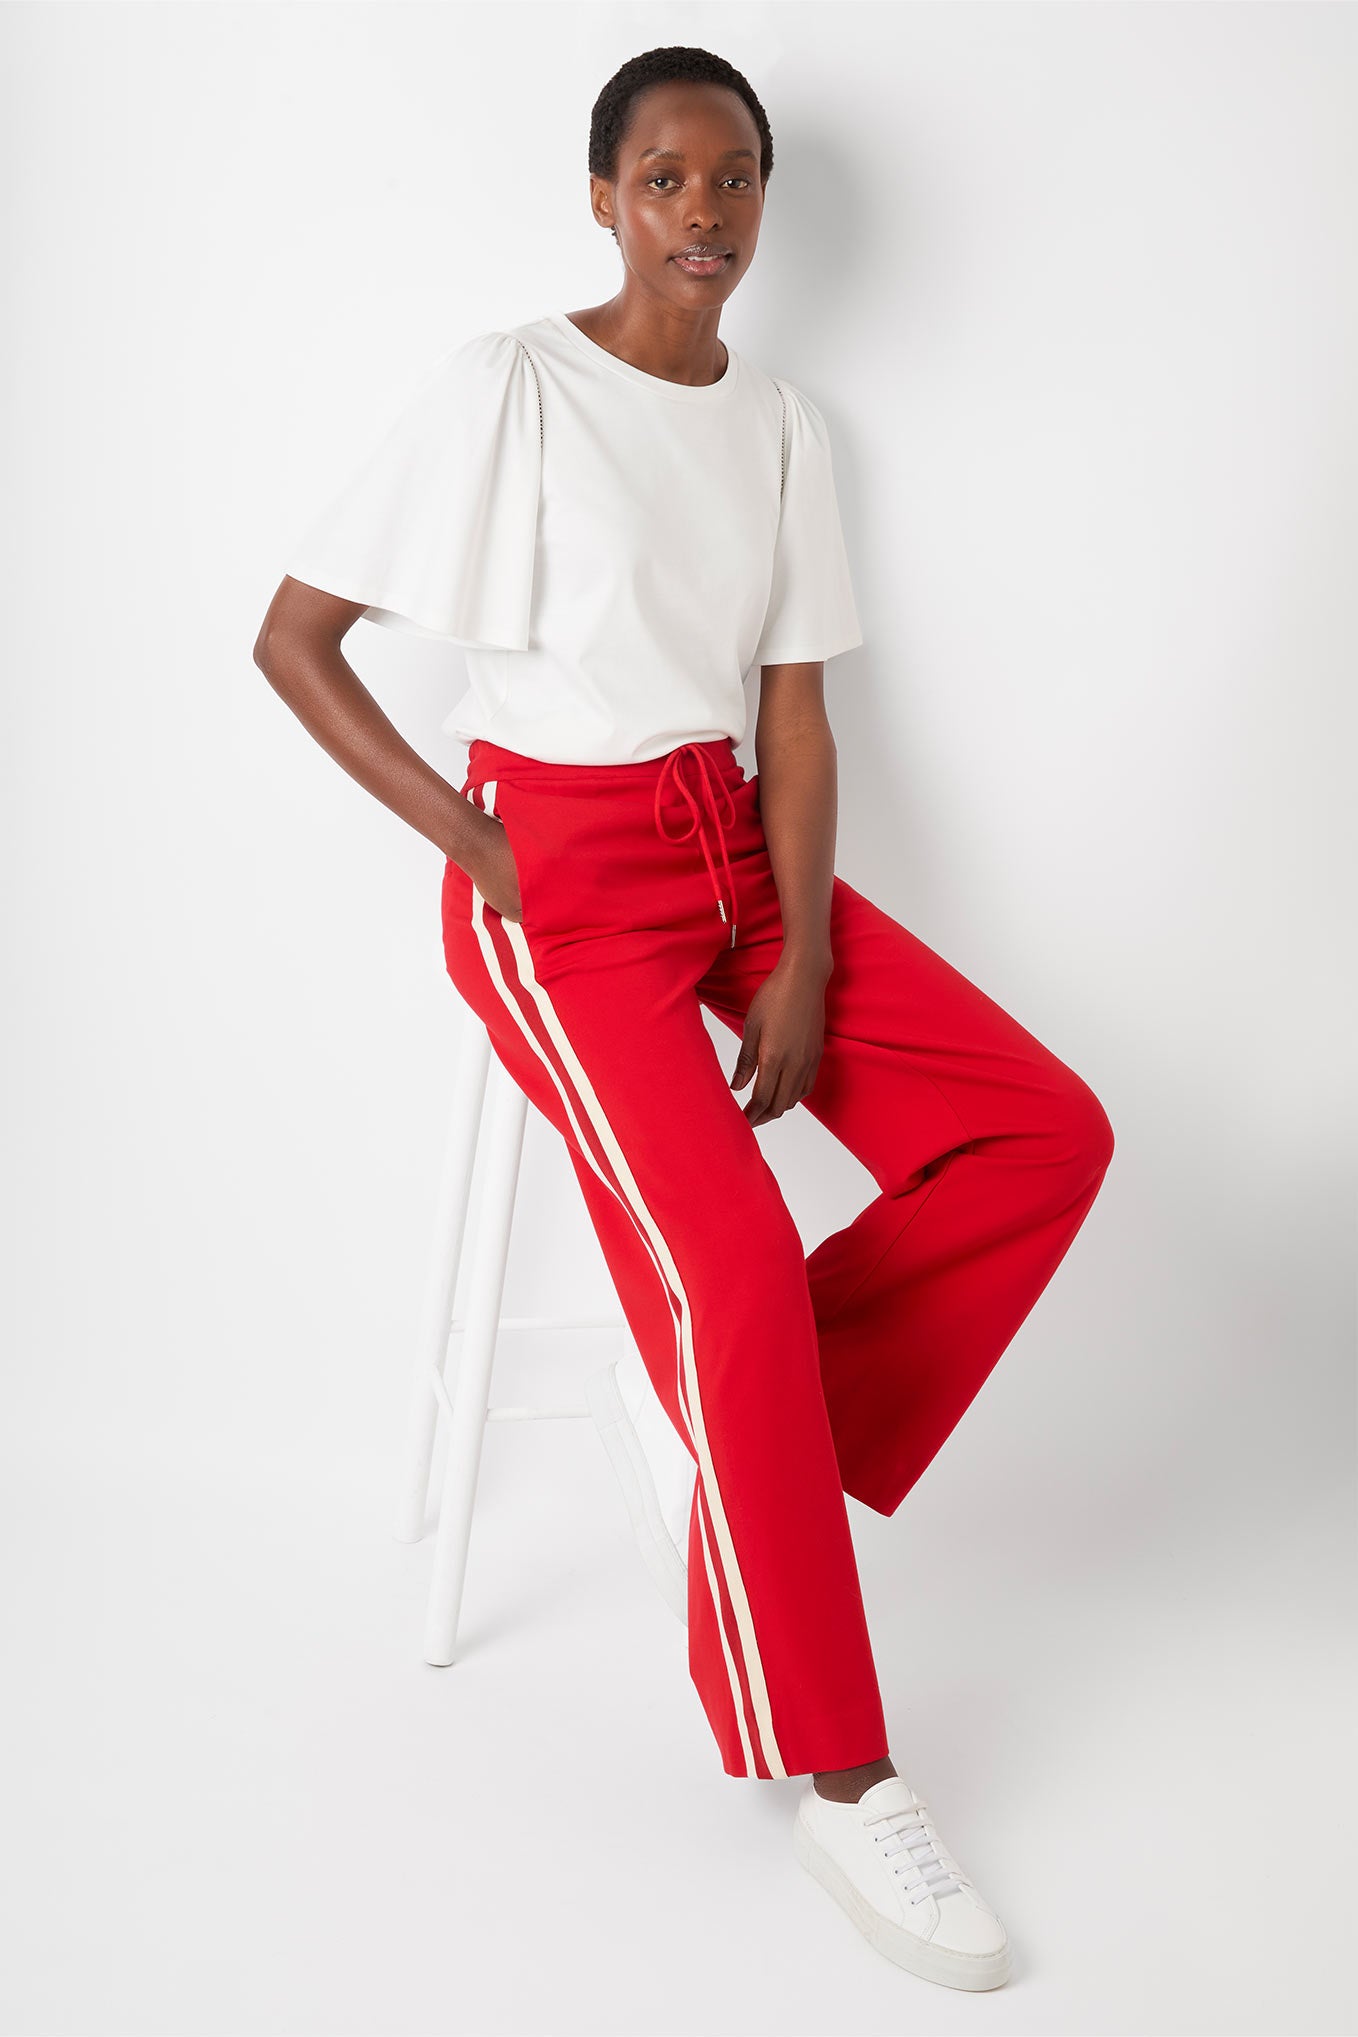 Solid Bright Red Pants for Women Online | Go Colors